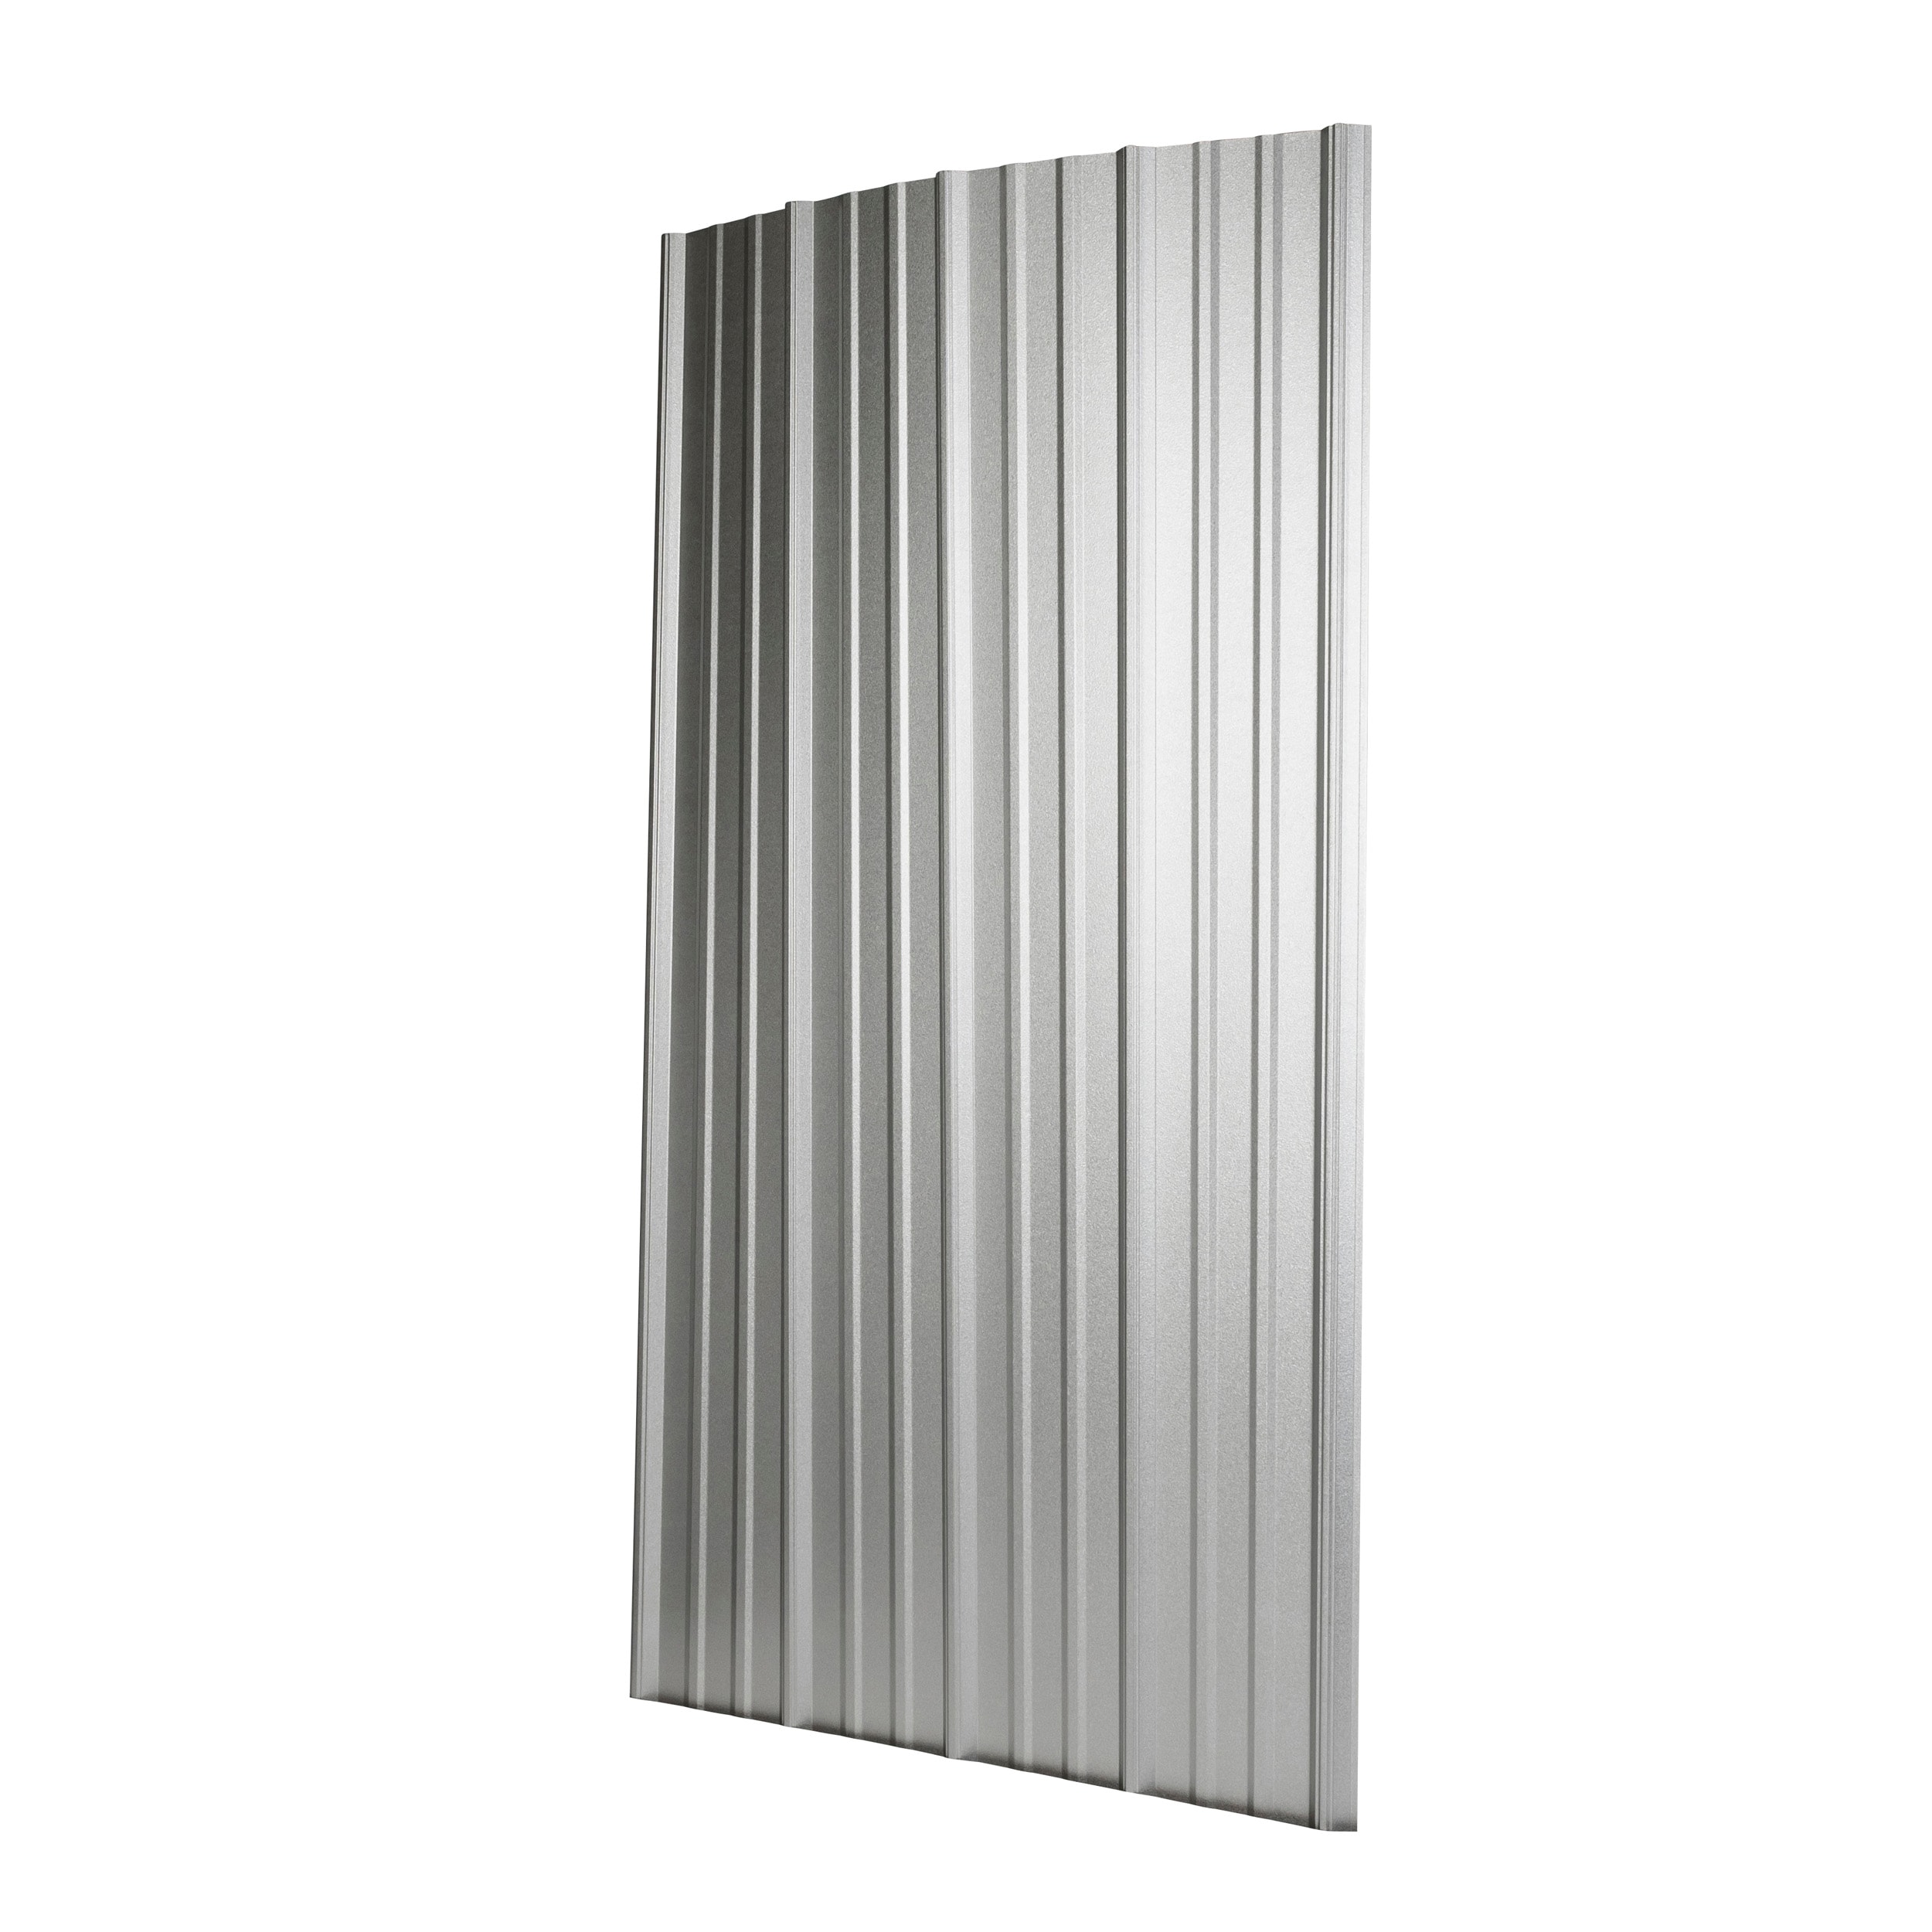 1no 6ft x 2ft wide Galvanised Corrugated Roof Sheet 200 £16.00 each @ J  Sharples